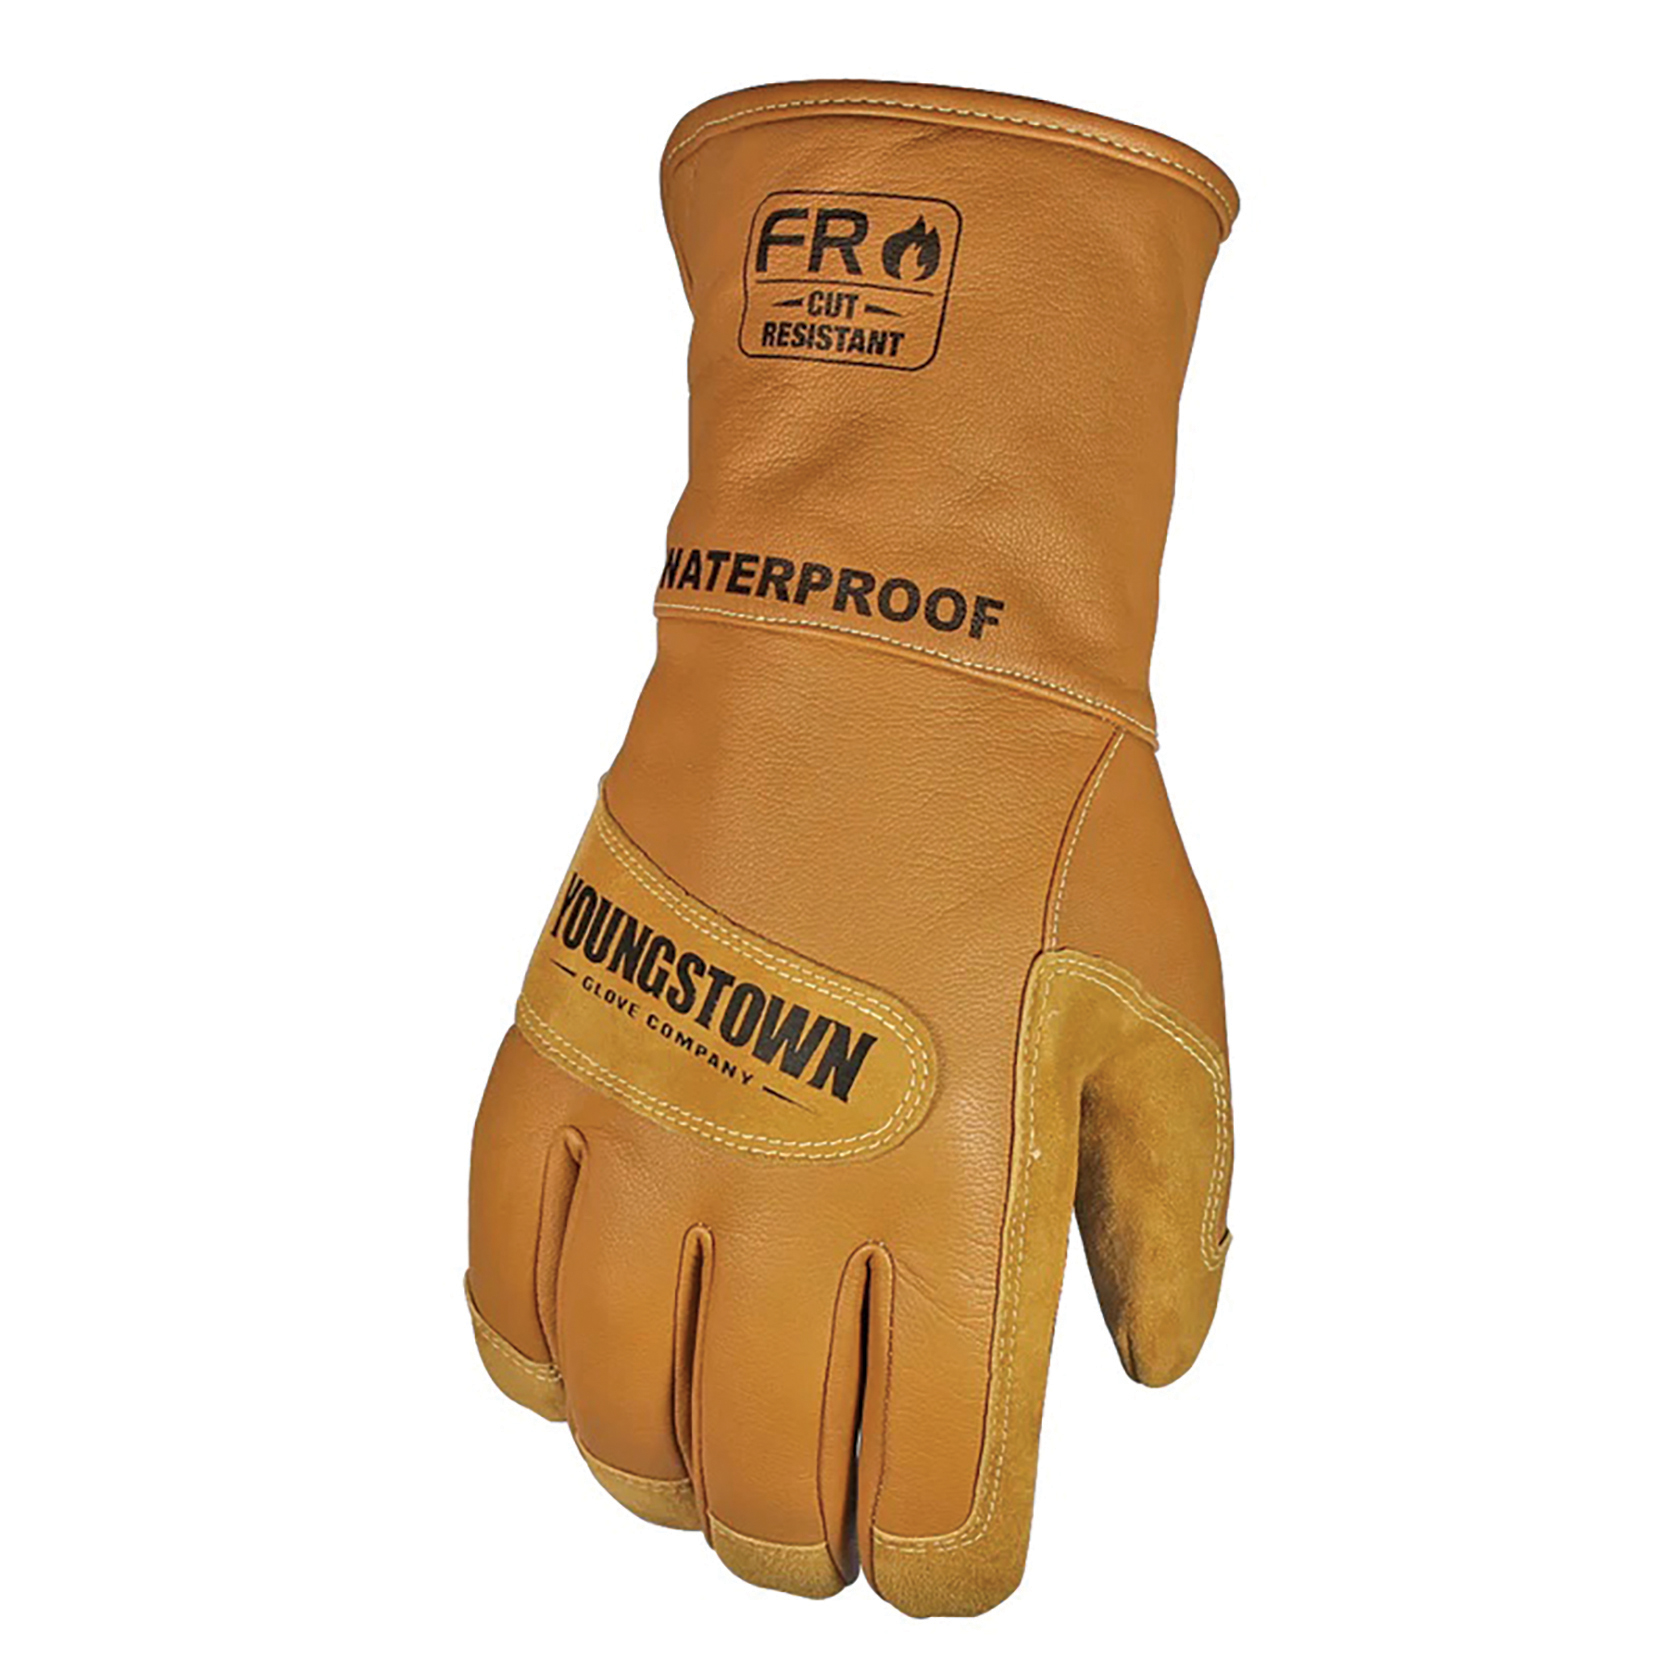 Youngstown Gloves Utility Gloves